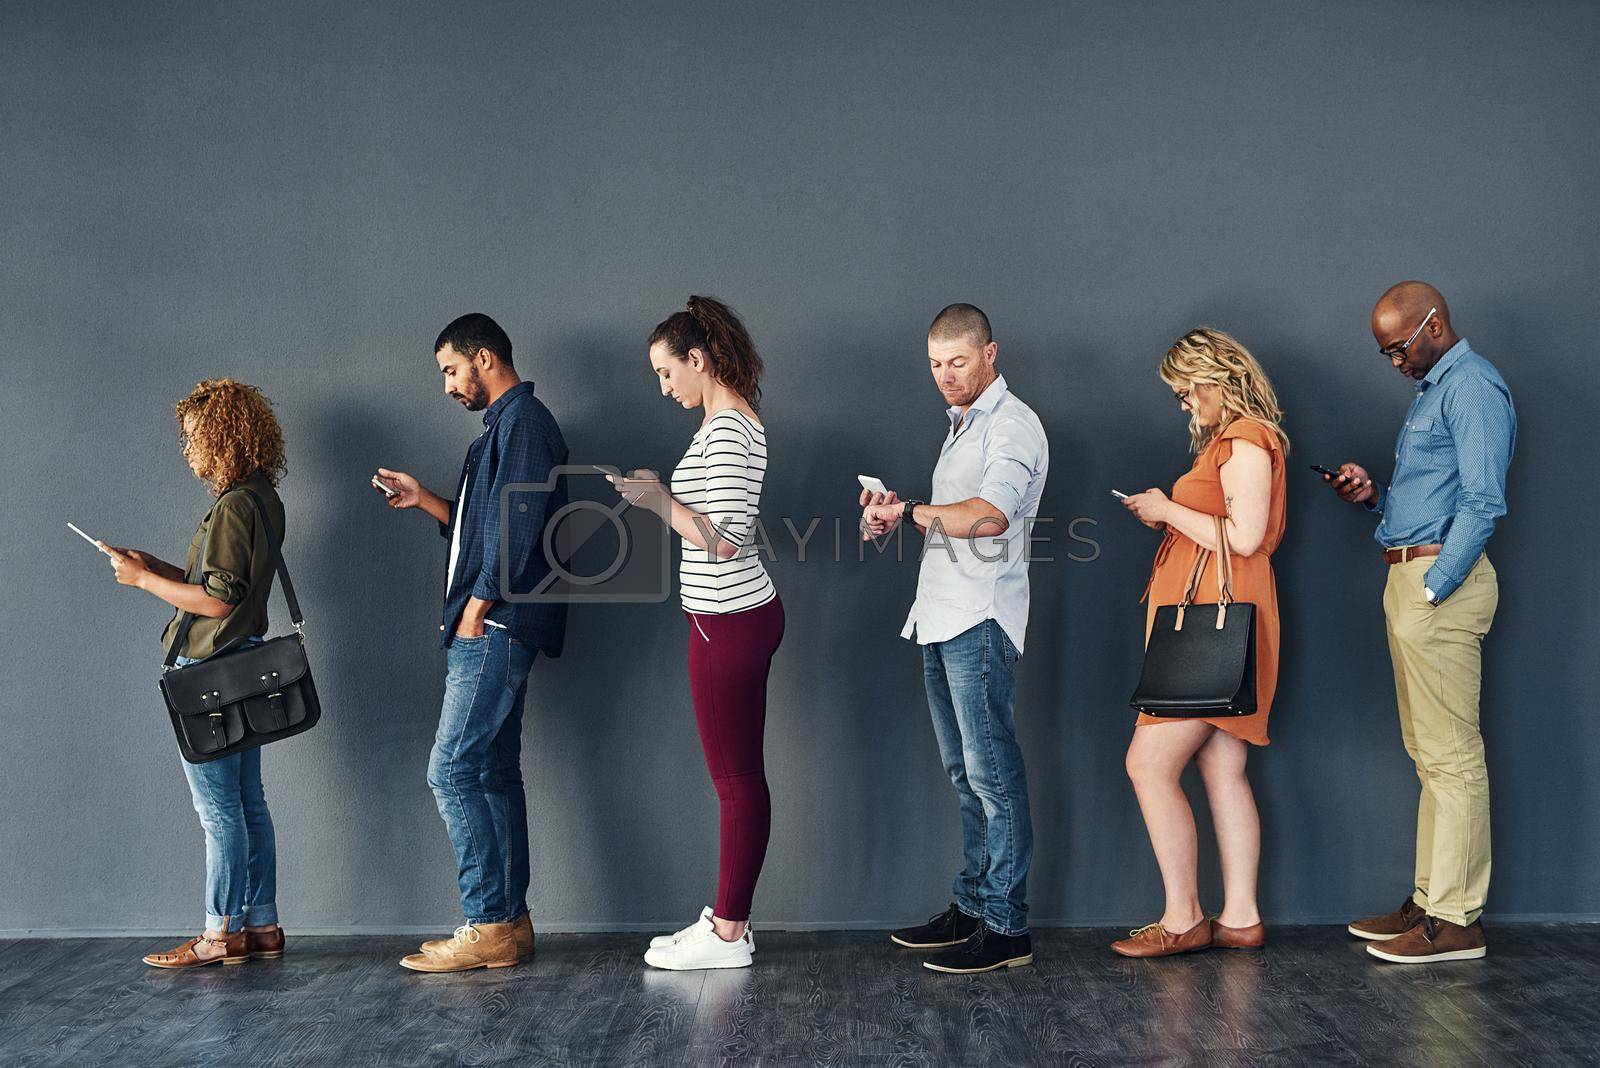 Royalty free image of Connected in their own ways. Studio shot of people waiting in line against a grey background. by YuriArcurs